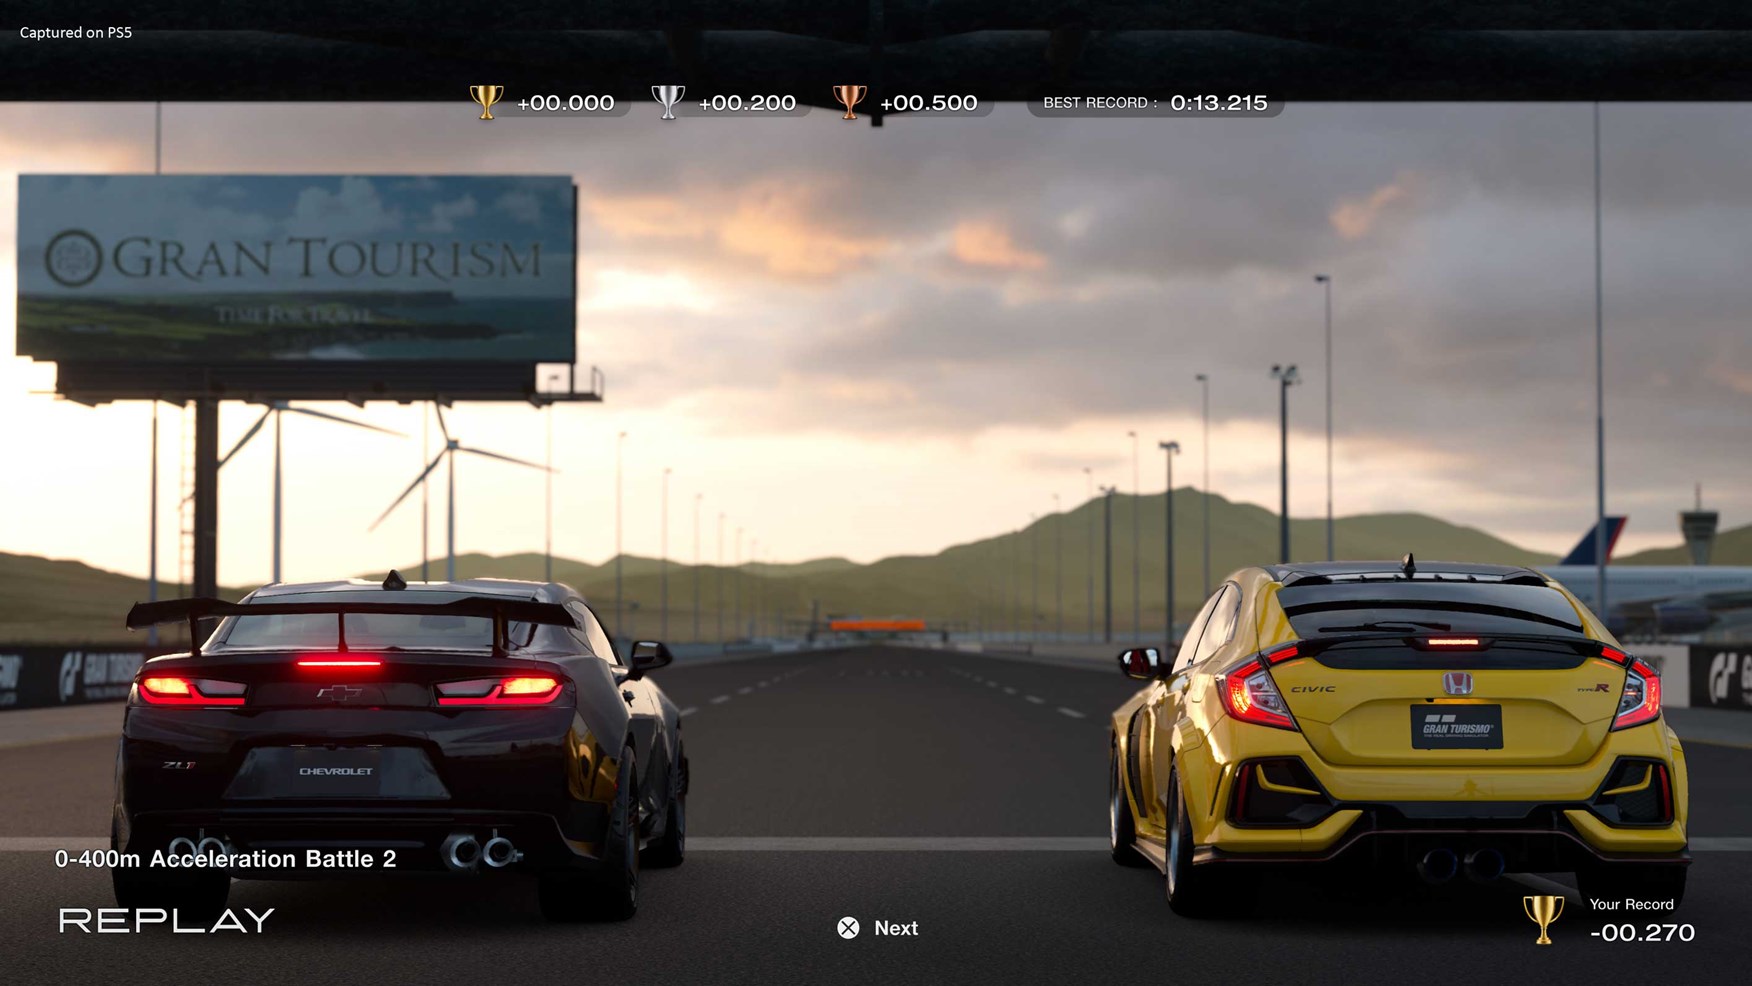 Gran Turismo 7: Stunning Cars, Heavy Microtransactions - PS5 Review